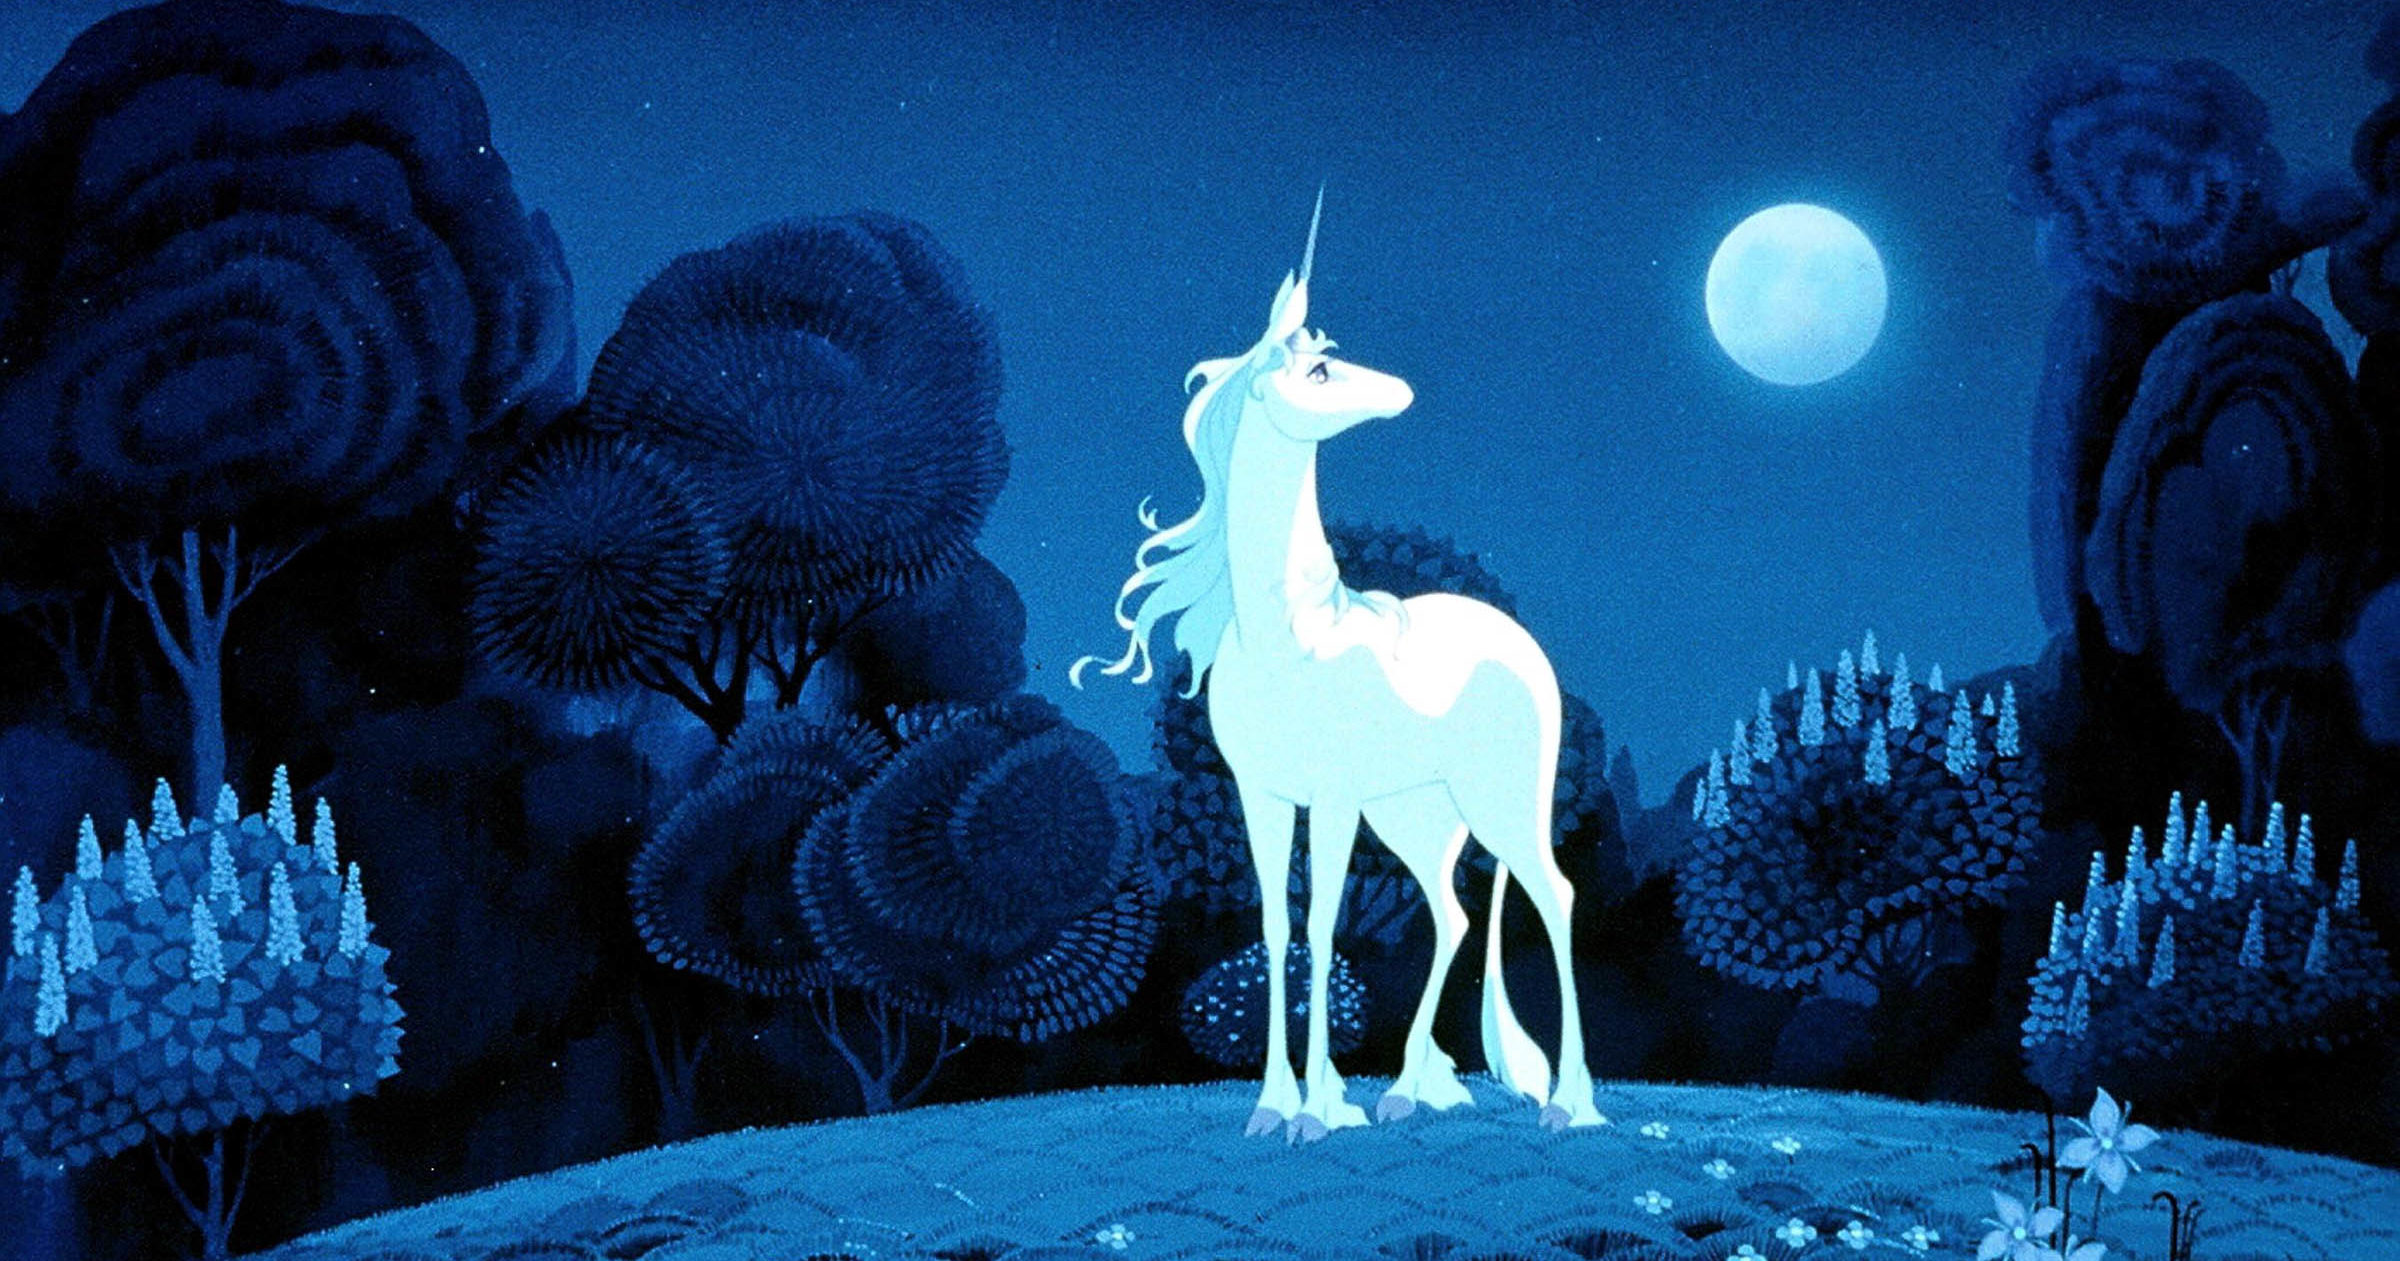 “The Last Unicorn” Returns Home: Renowned Fantasy Author Peter S. Beagle Finally Prevails in Legal Battles